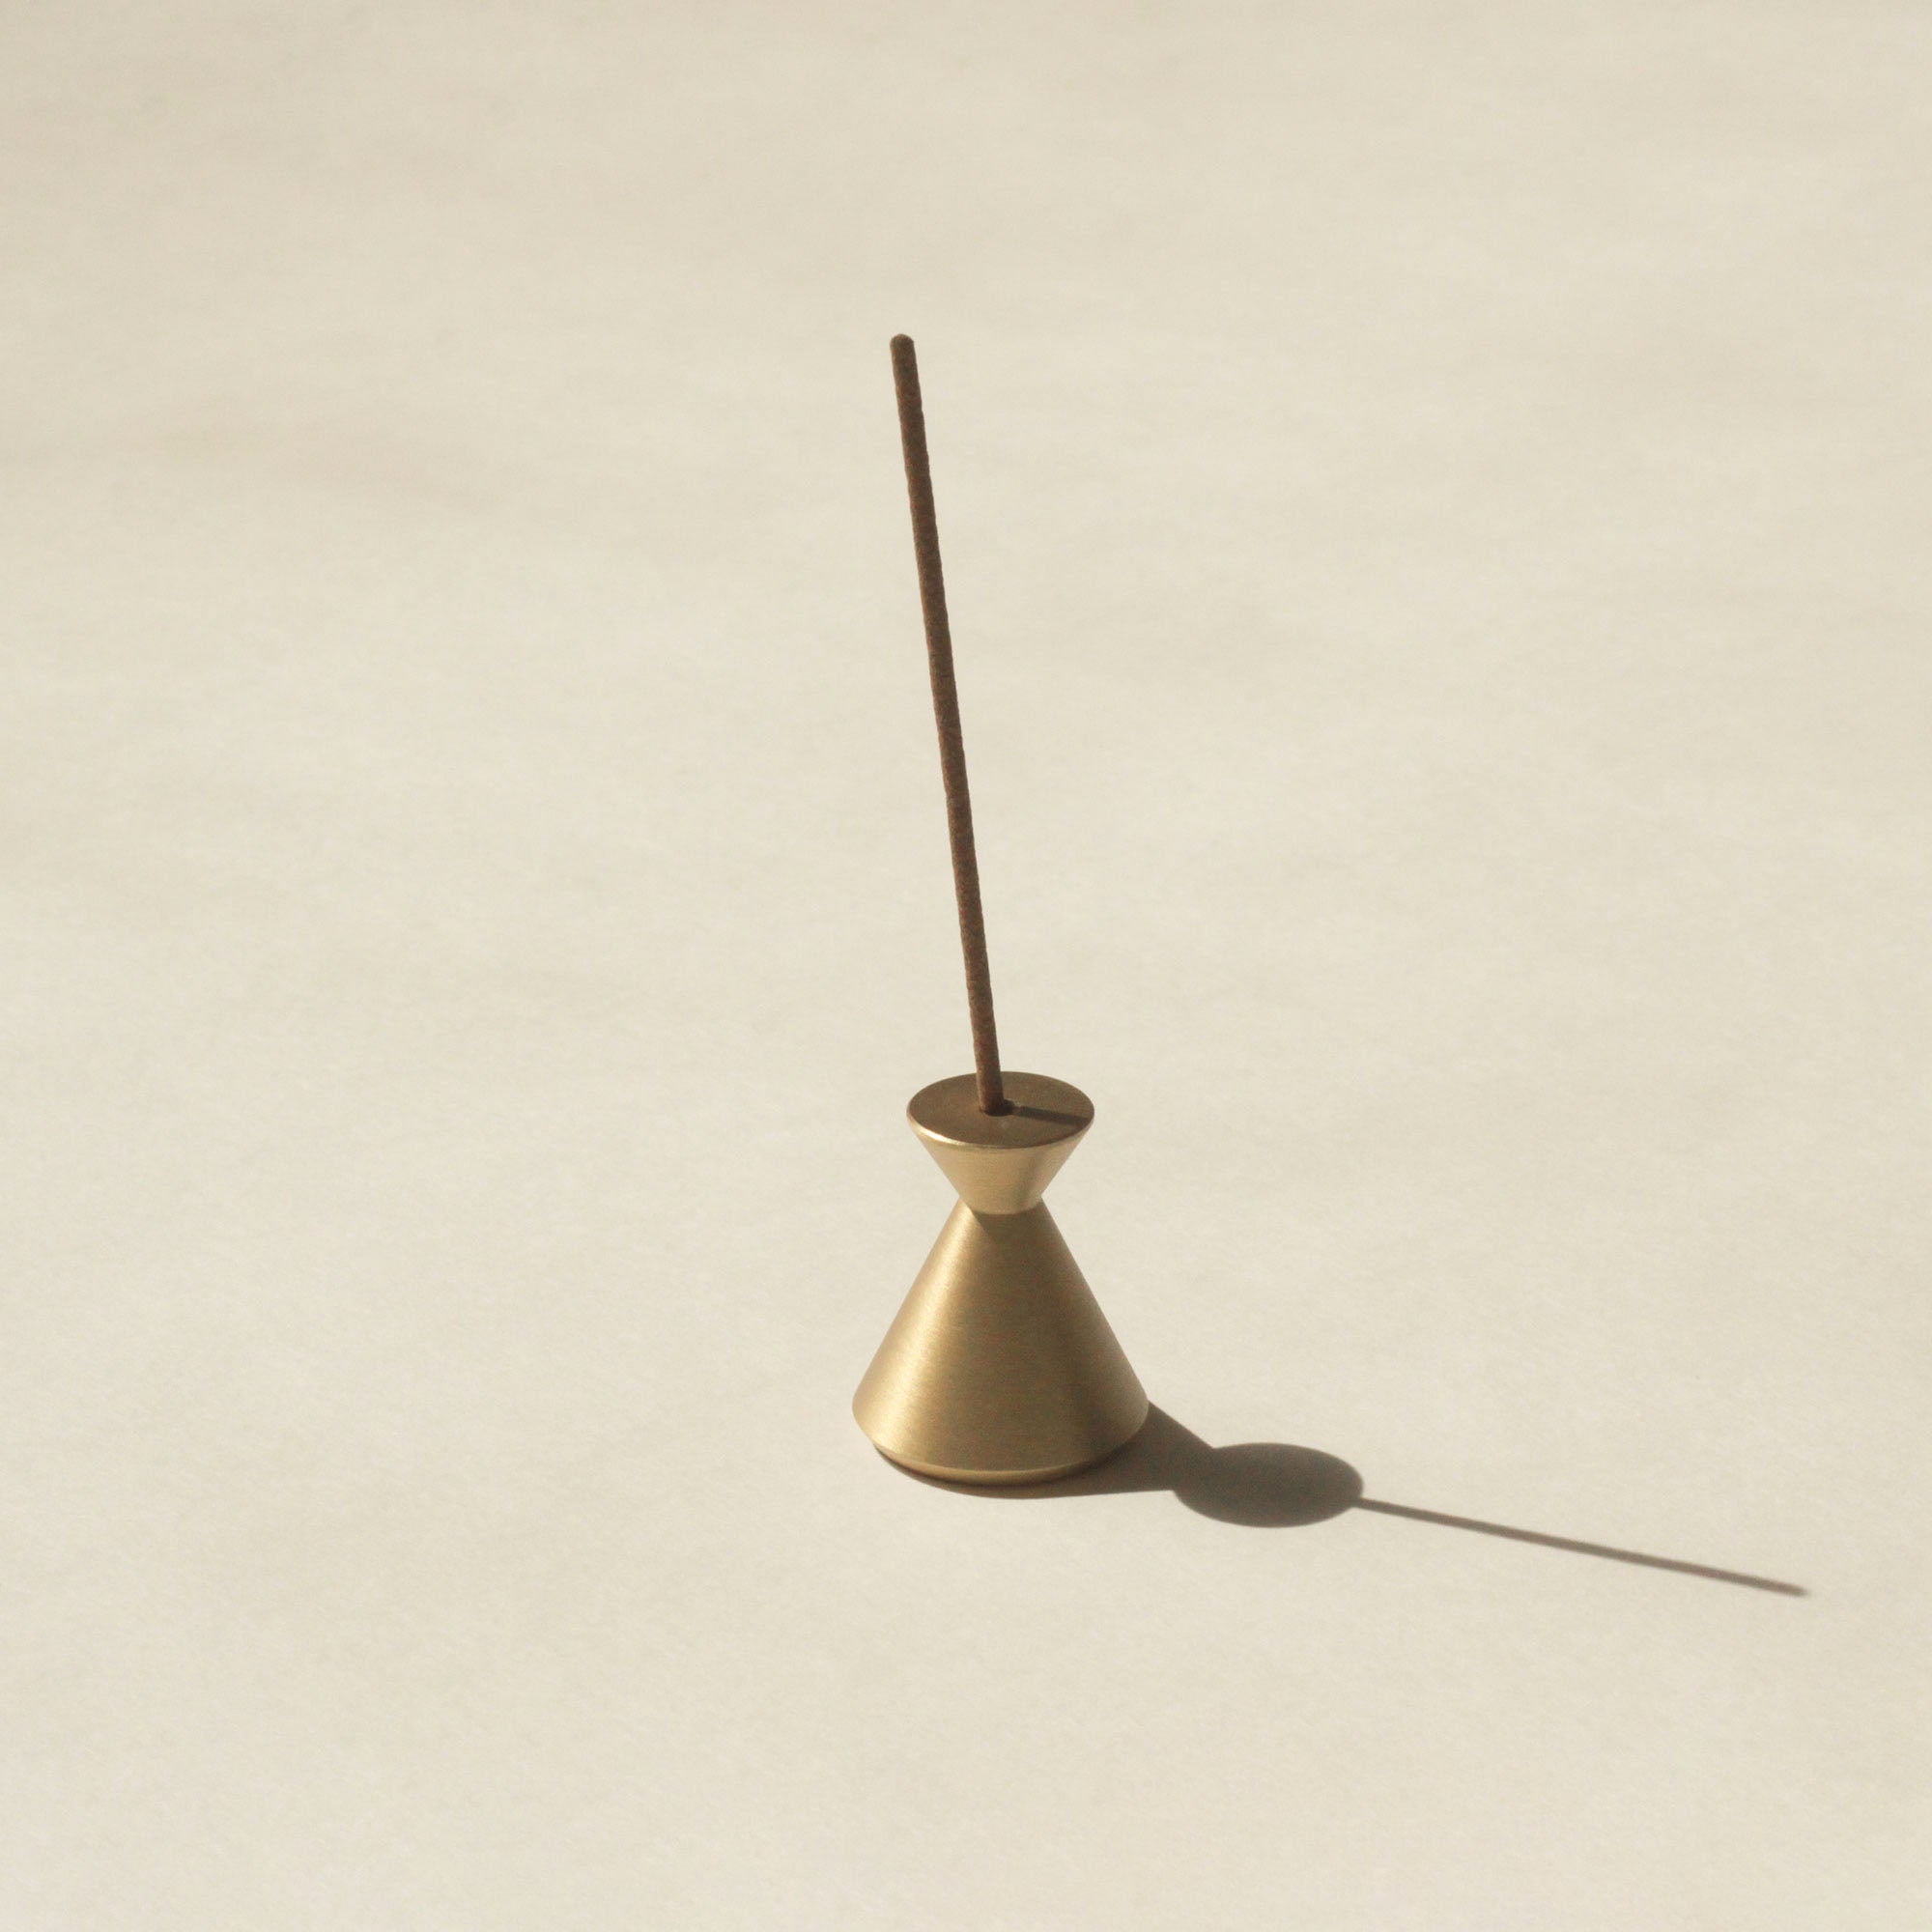 brass hourglass incense holder with Japanese incense stick